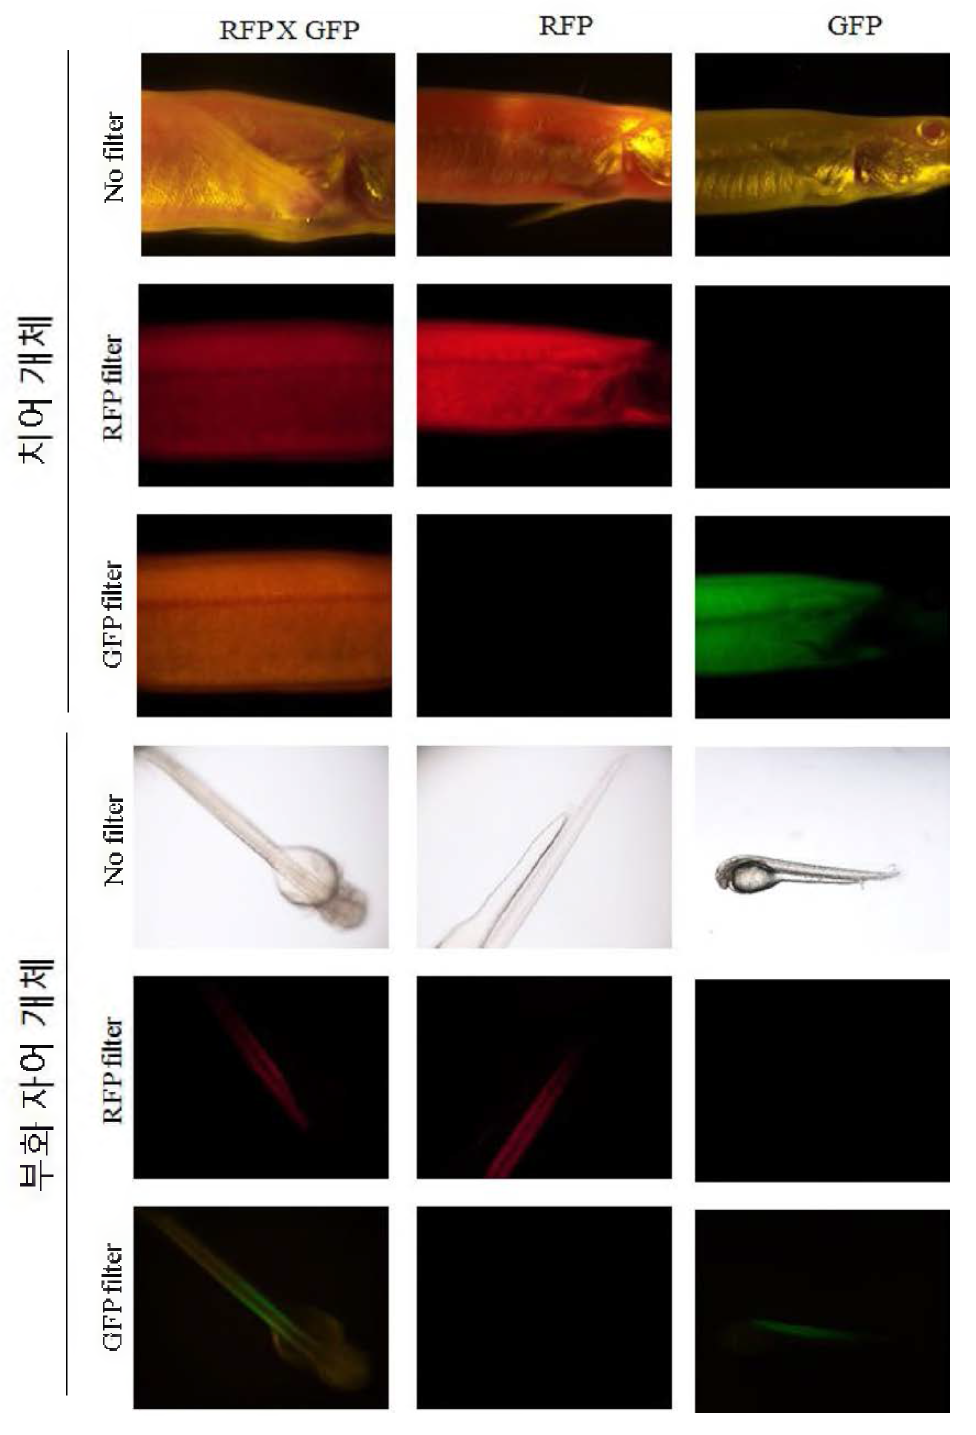 Co-expression of RFP and GFP m muscles of transgenic albino loaches